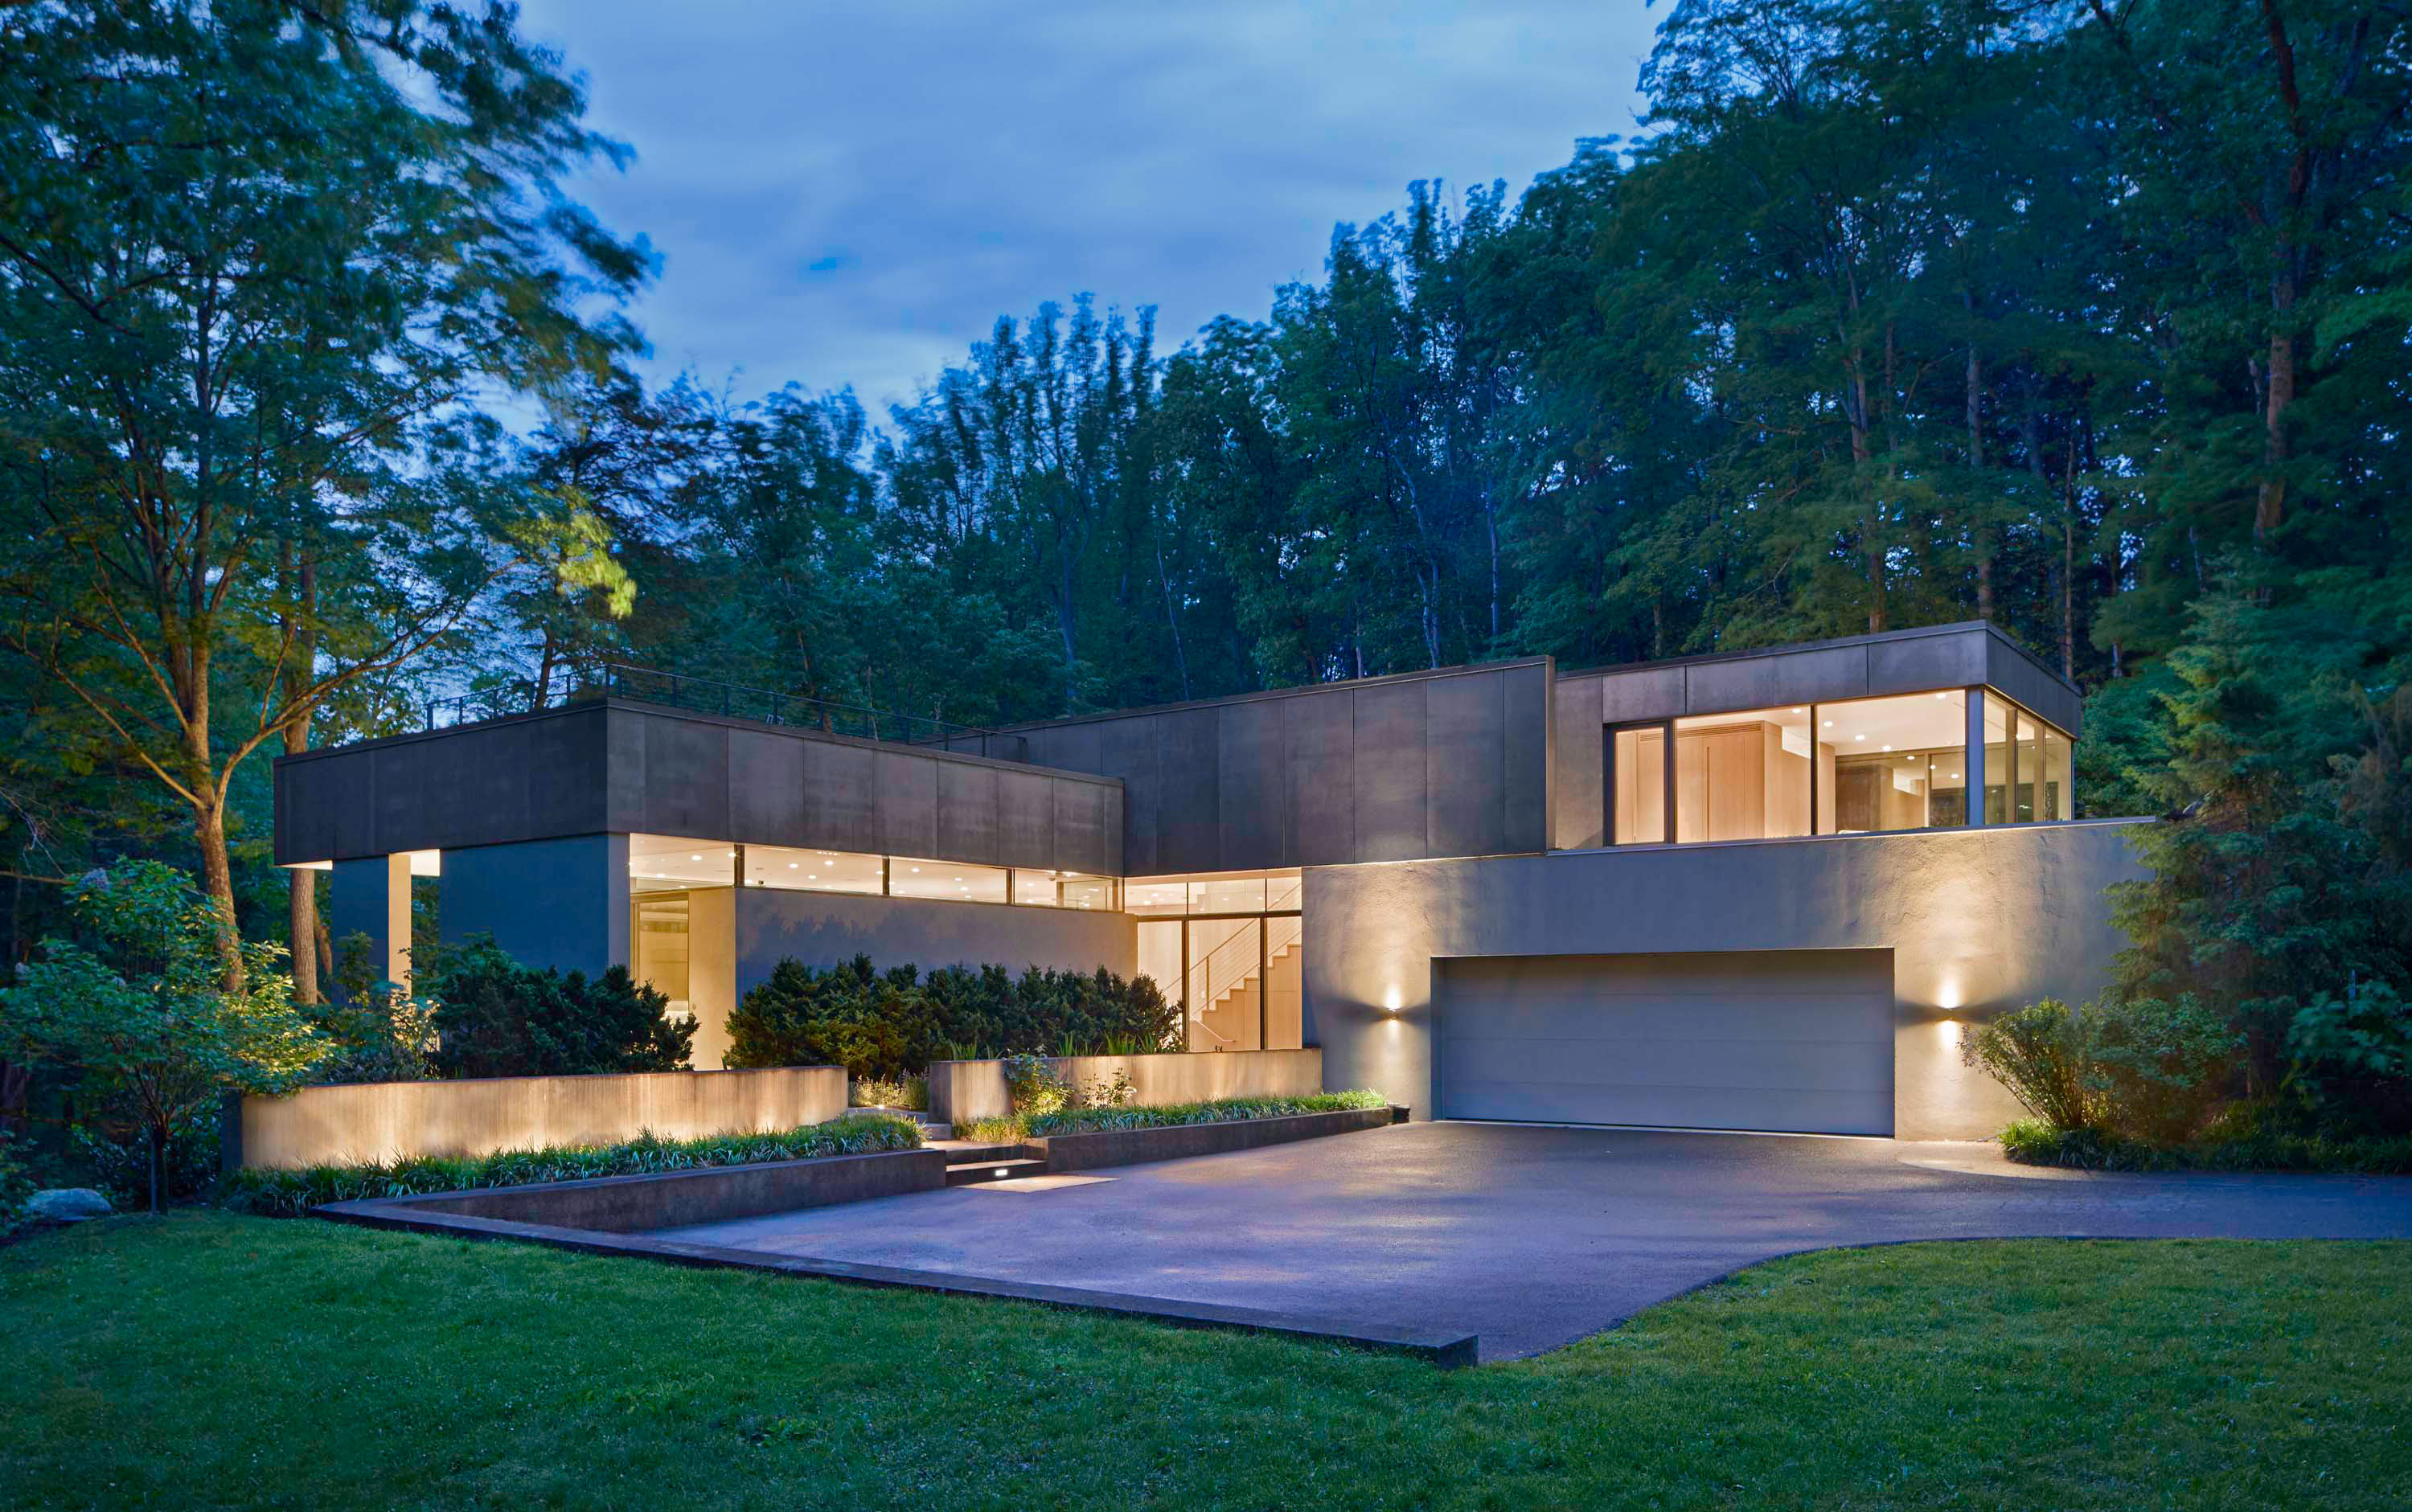 Exterior photo of Weston Residence by Specht Novak Architects. Shot by Jasper Lazor, featuring the facade of the concrete and glass home with roof gardens immersed in the landscape.